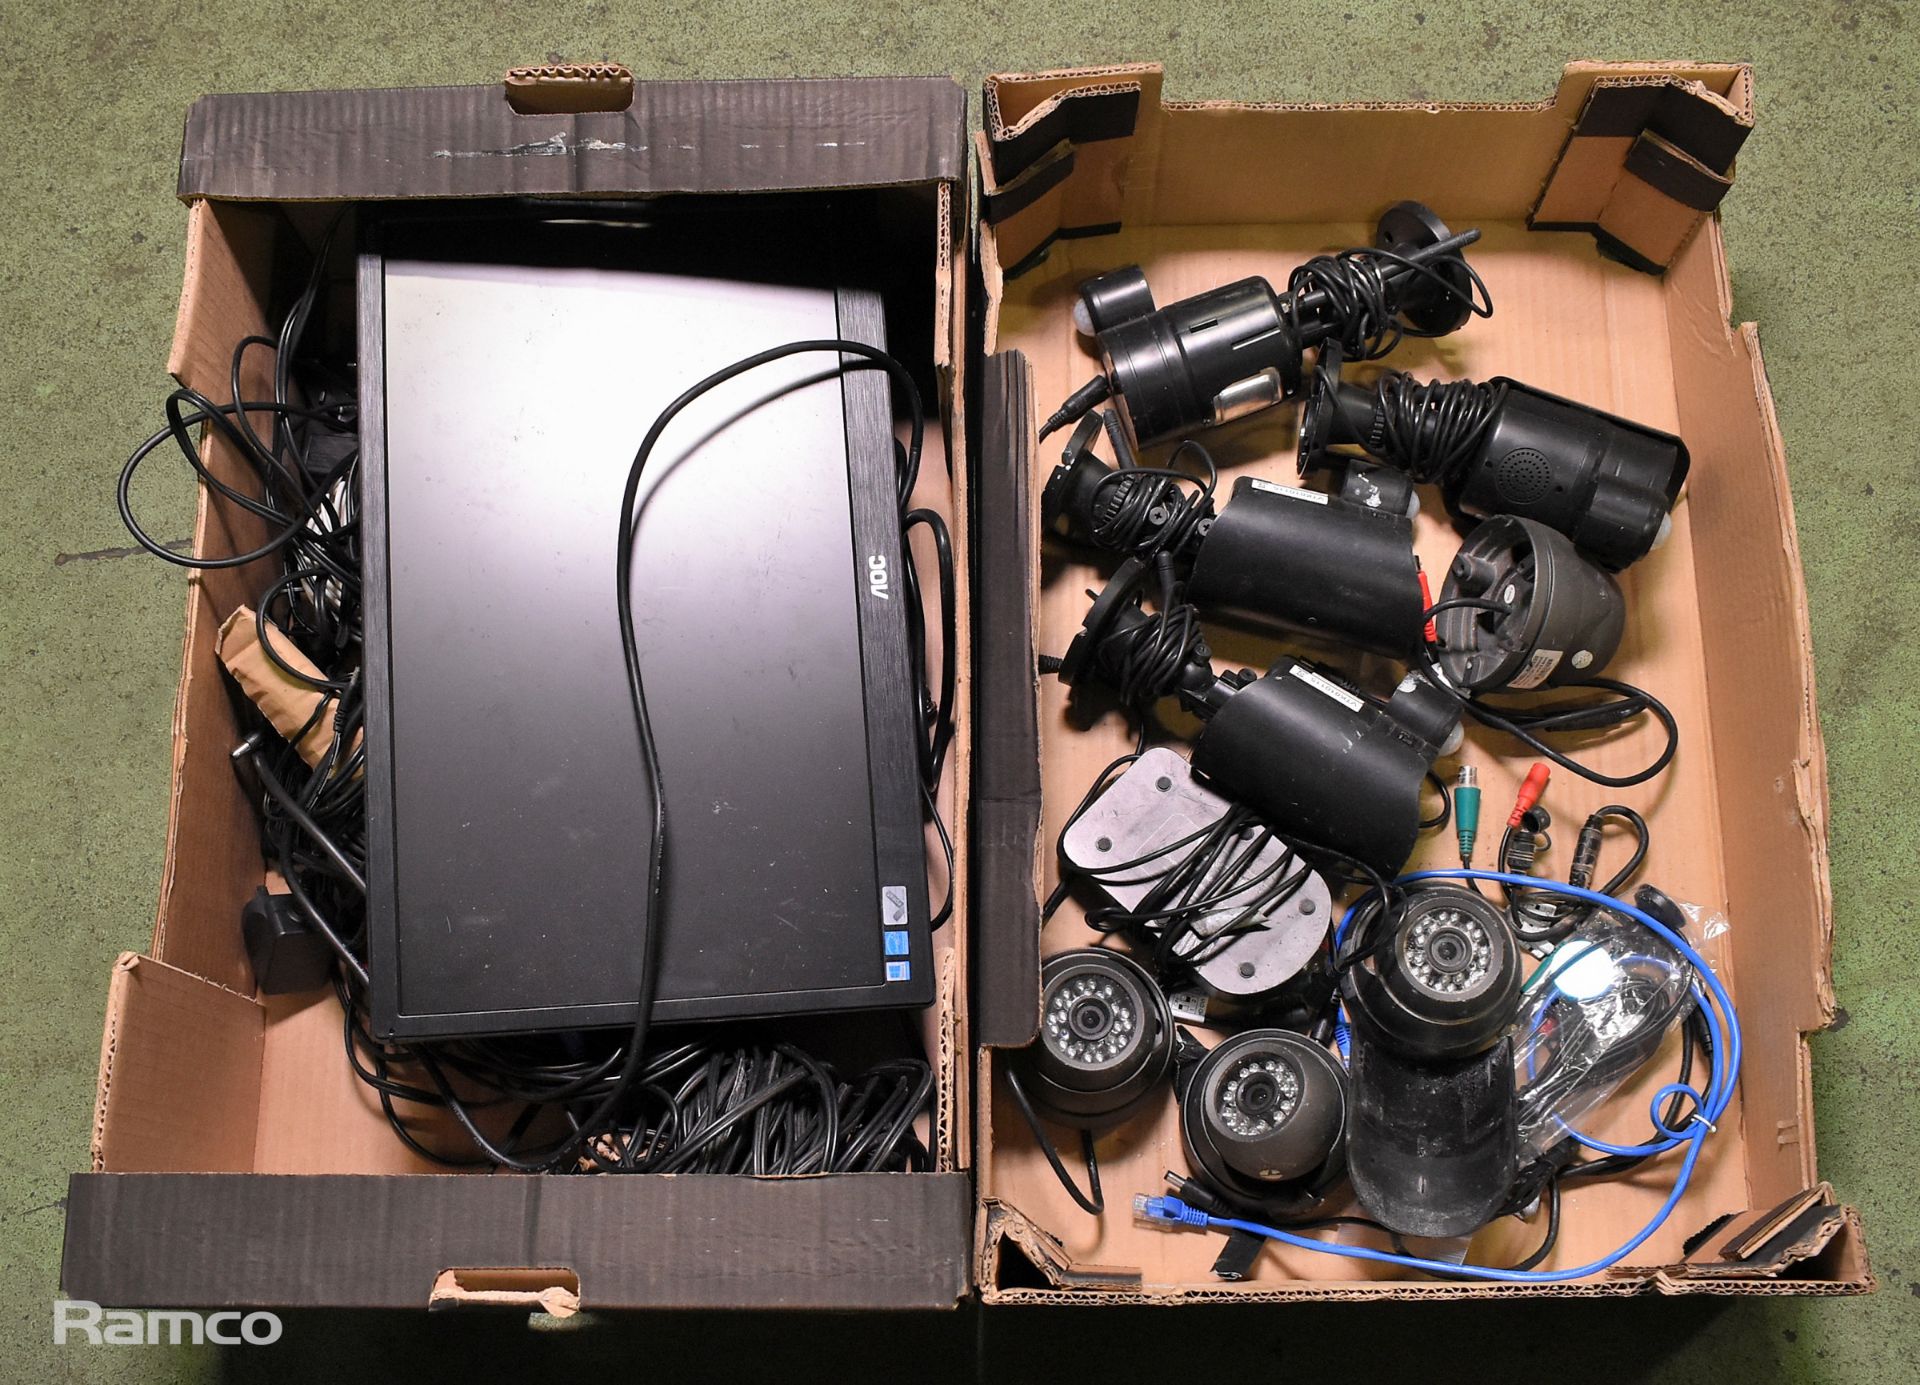 2x boxes of assorted CCTV cameras, cables and accessories